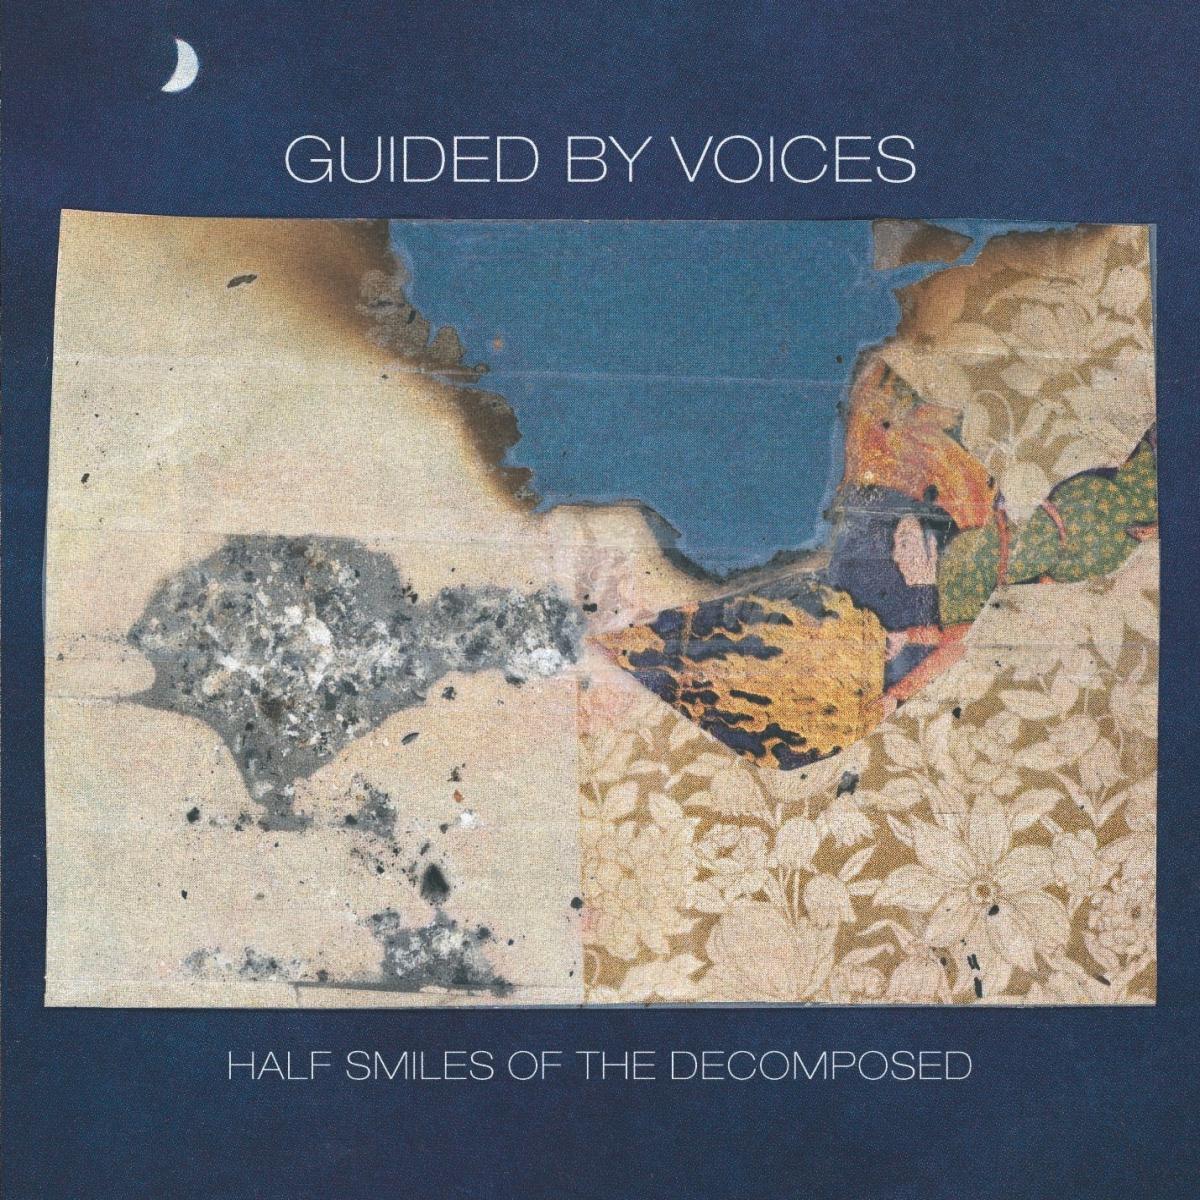 Guided by Voices - Half Smiles of the Decomposed (Color Vinyl, Red) - 744861061281 - LP's - Yellow Racket Records